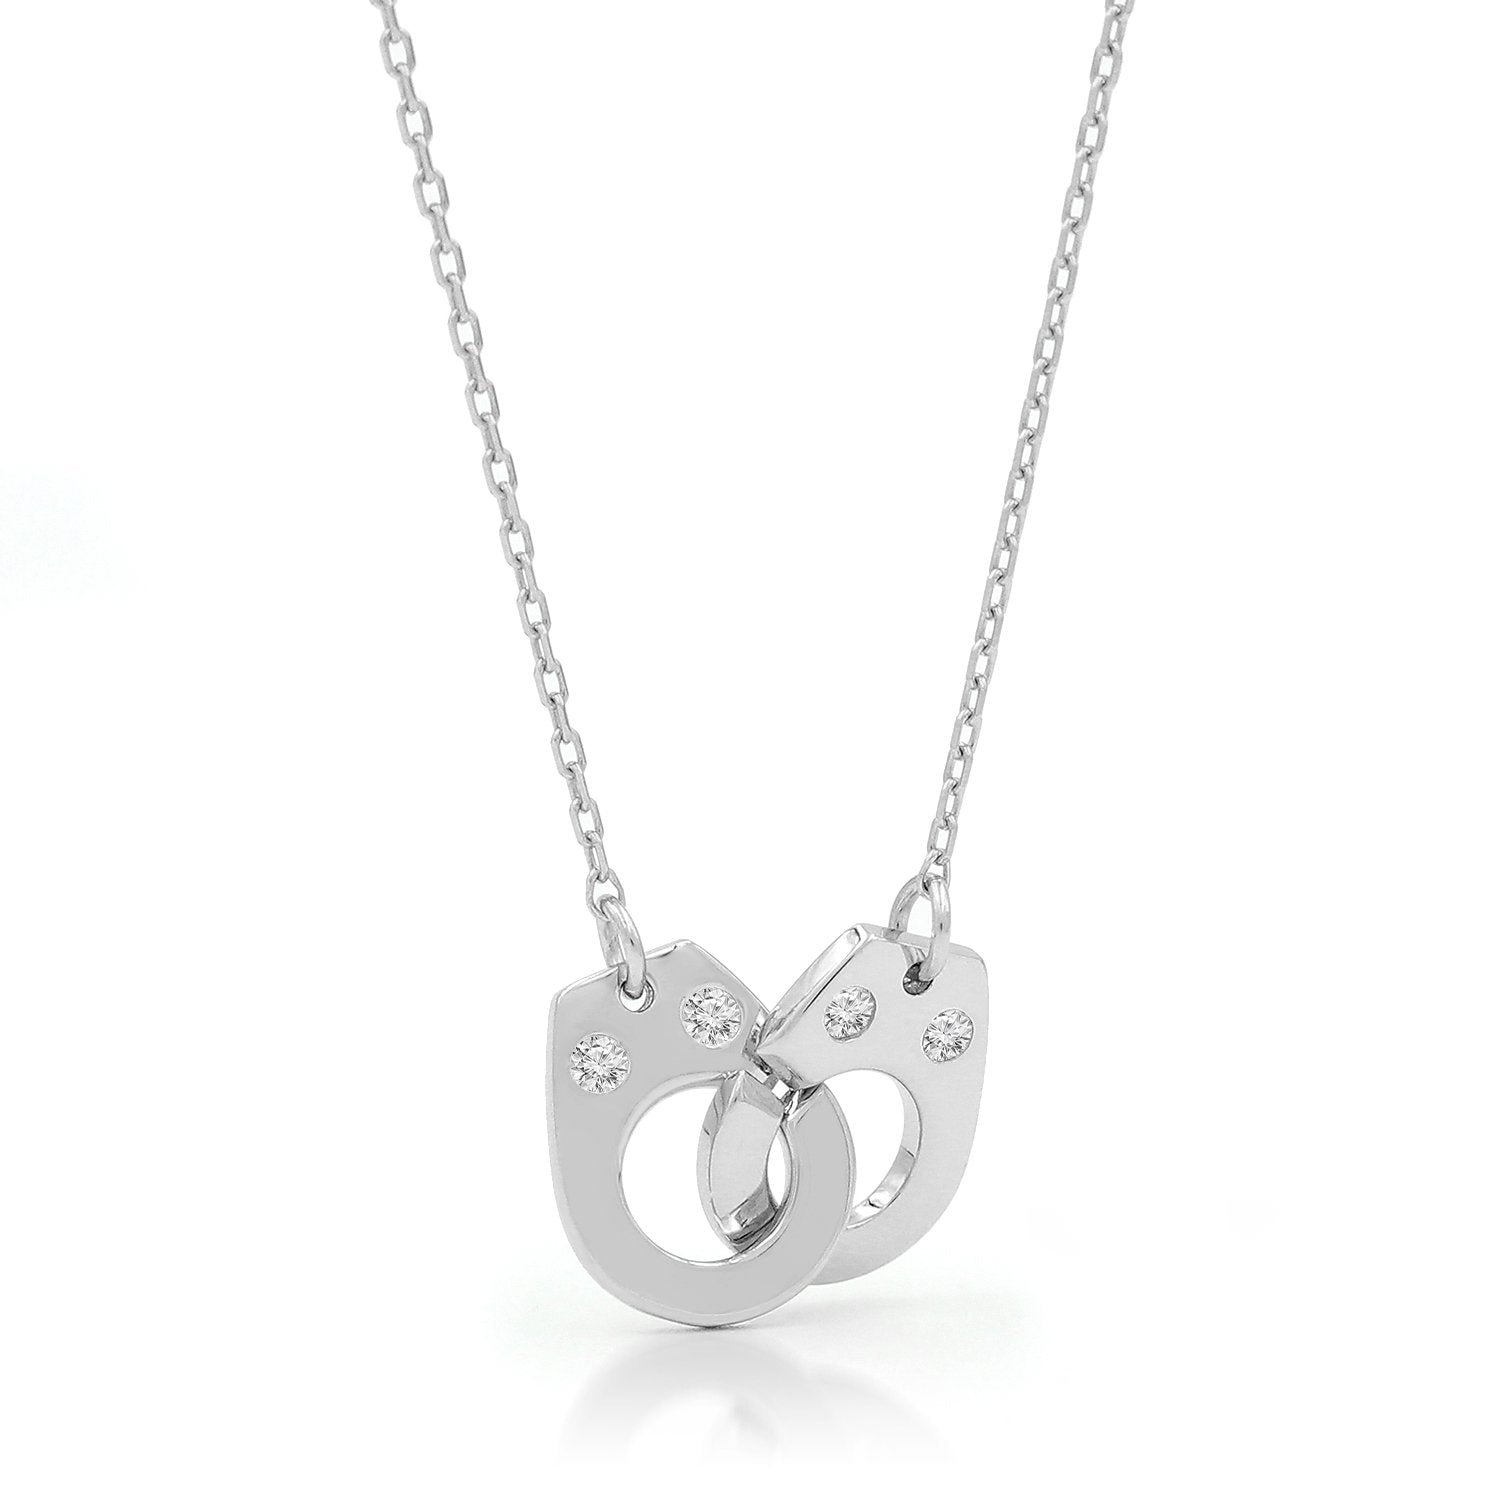 925 Sterling Silver Handcuff Studded Minimalist Necklace